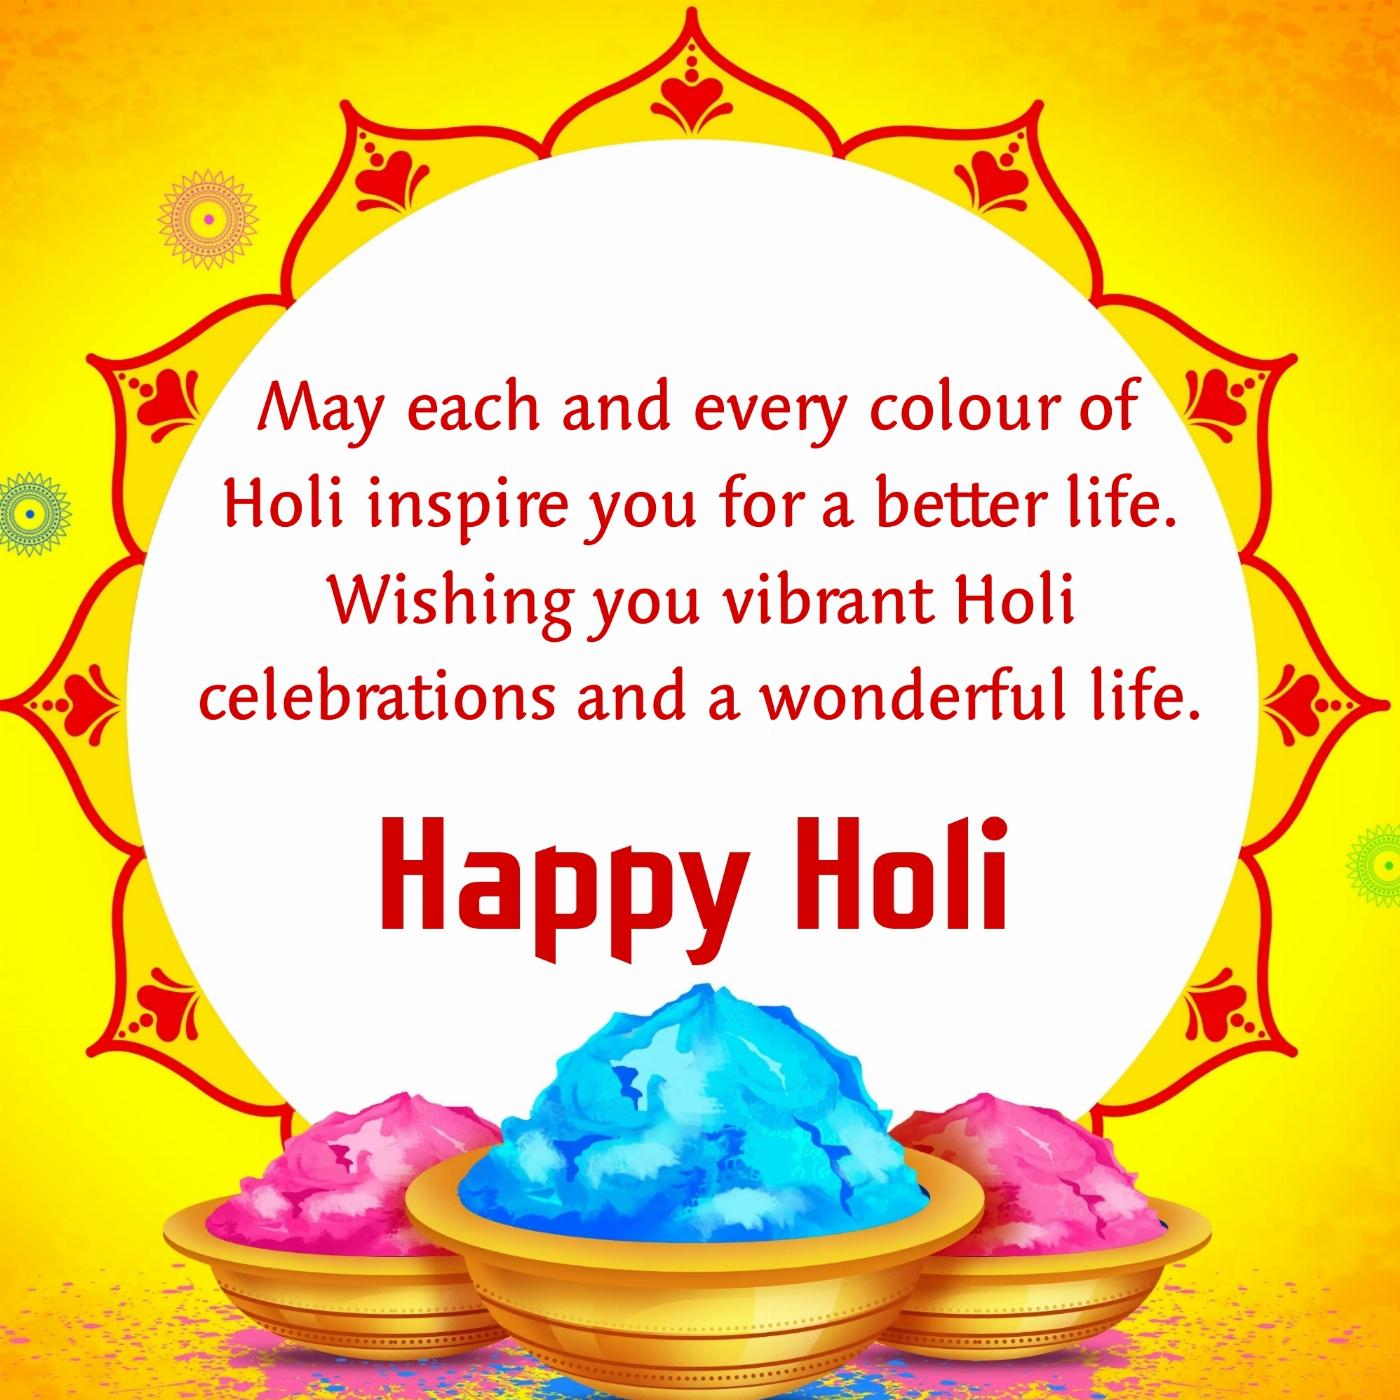 May each and every colour of Holi inspire you for a better life